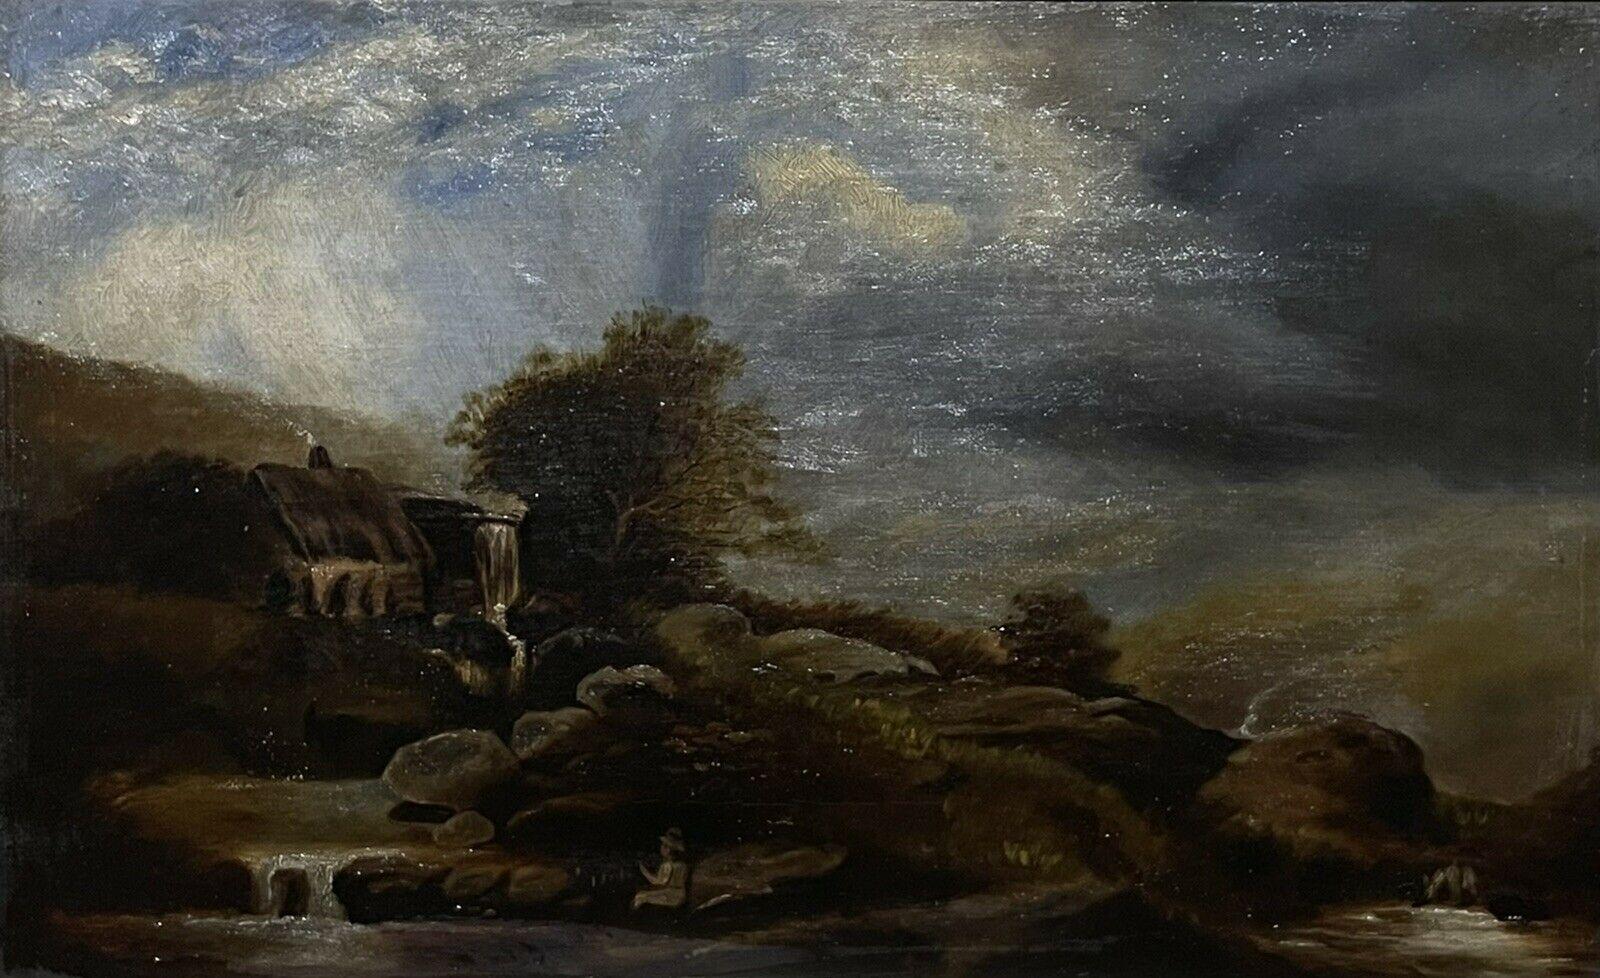 Welsh Antique Landscape Painting - Victorian Welsh Oil Painting Cottage by River in WIndswept Stormy Landscape